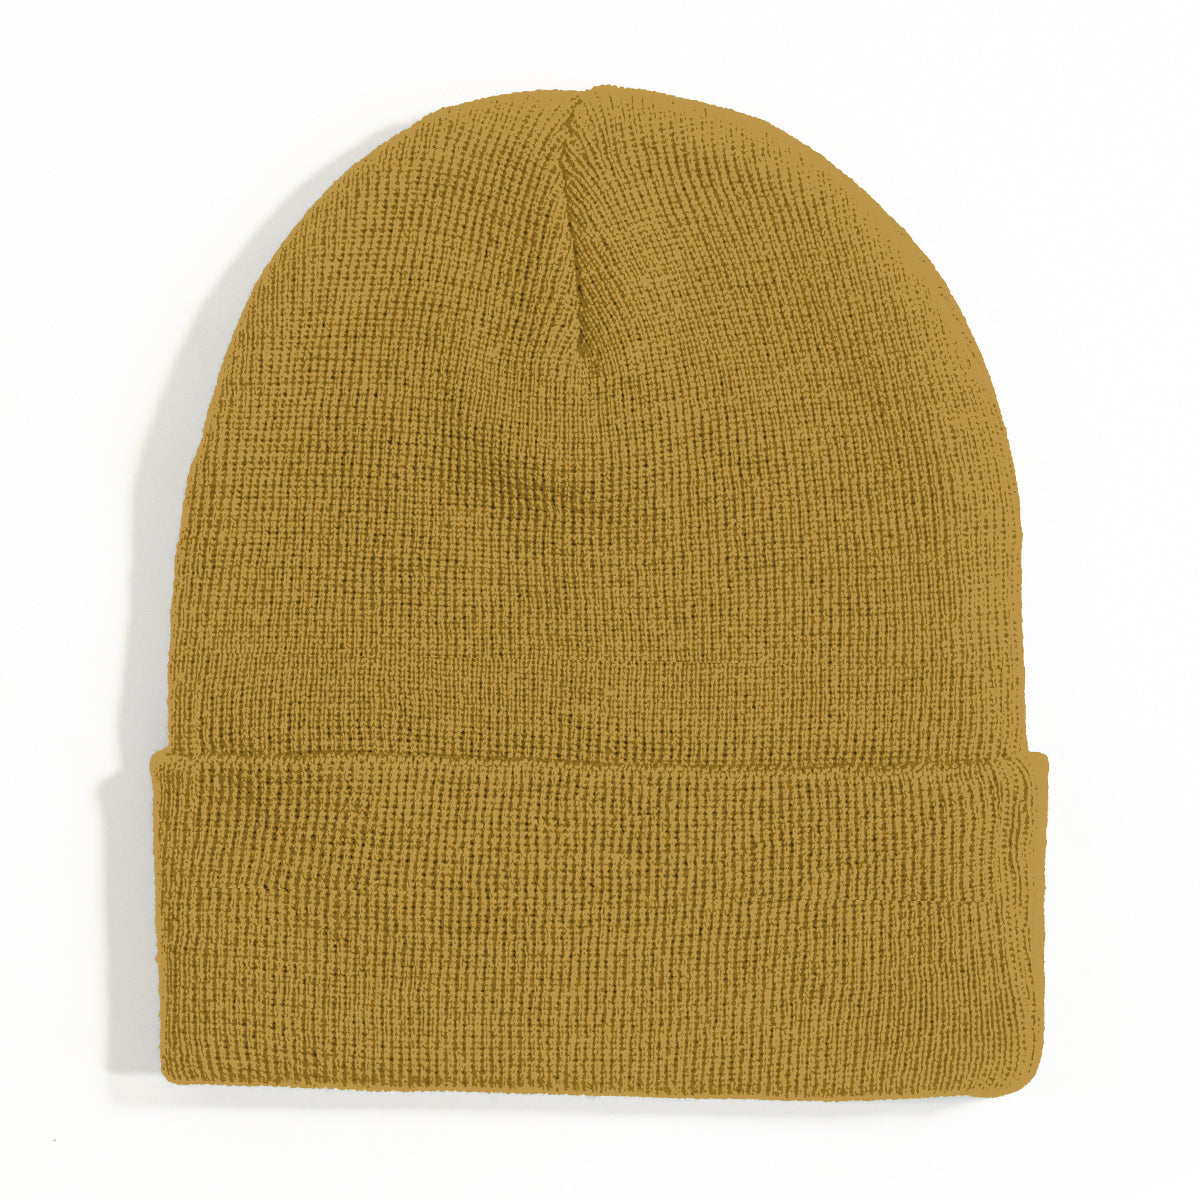 Lost Art Canada - yellow wool winter toque back view